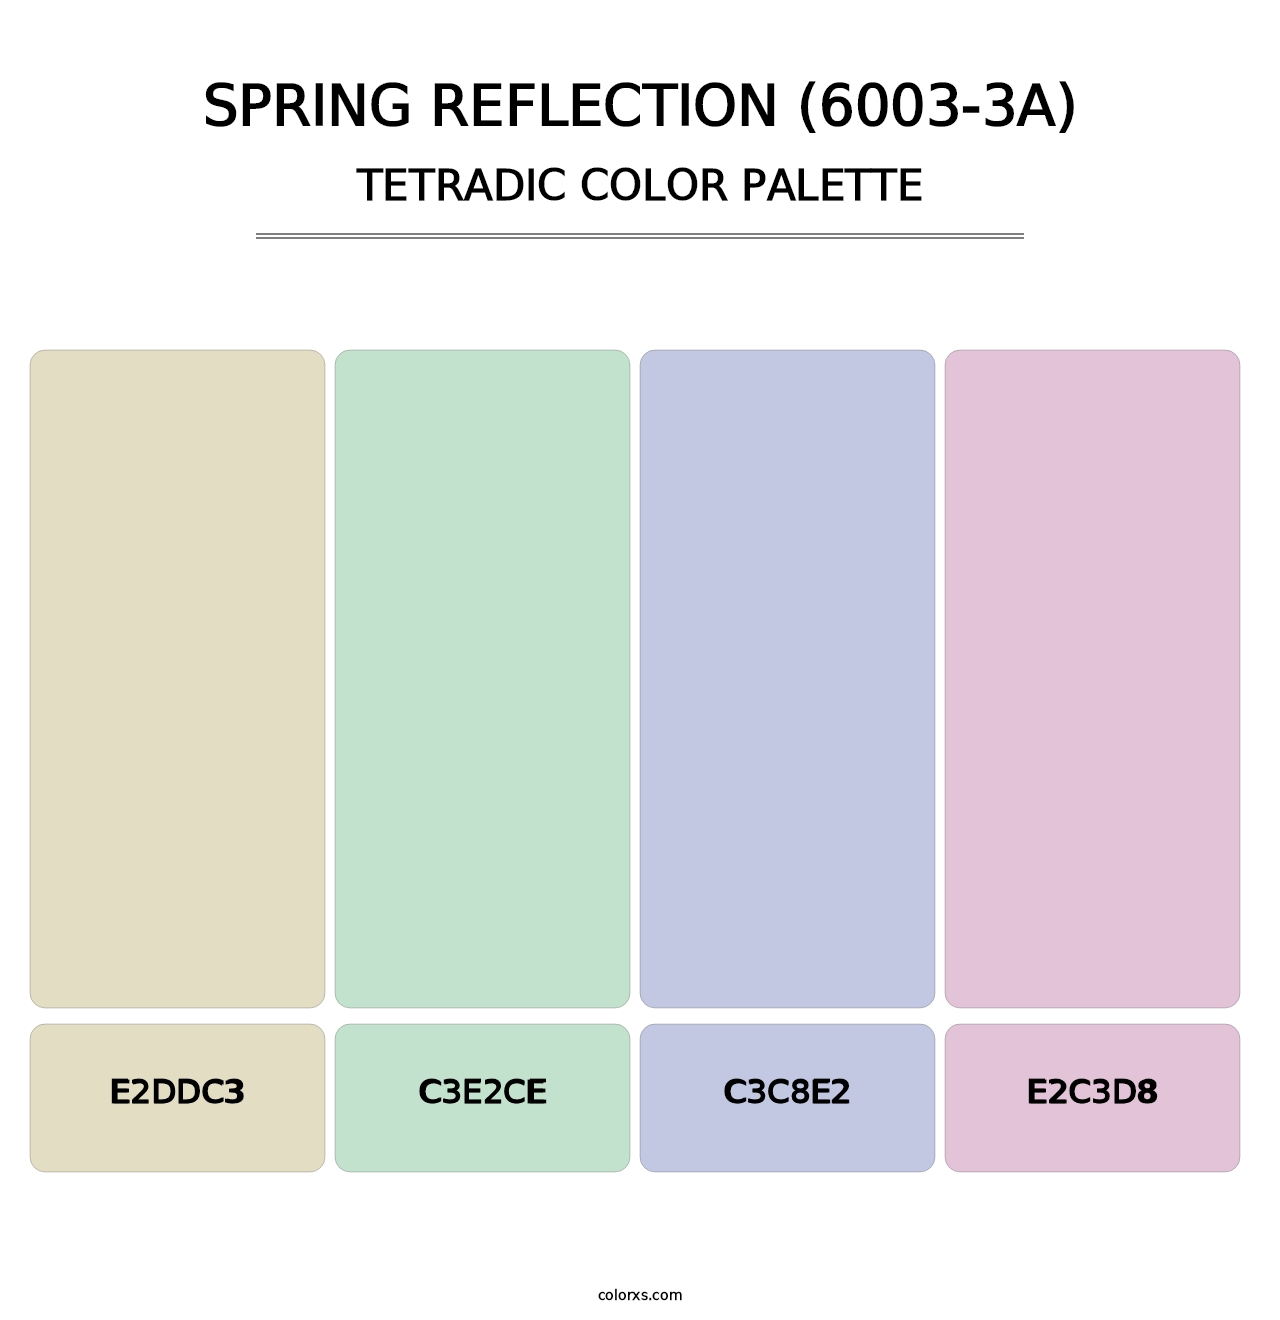 Spring Reflection (6003-3A) - Tetradic Color Palette